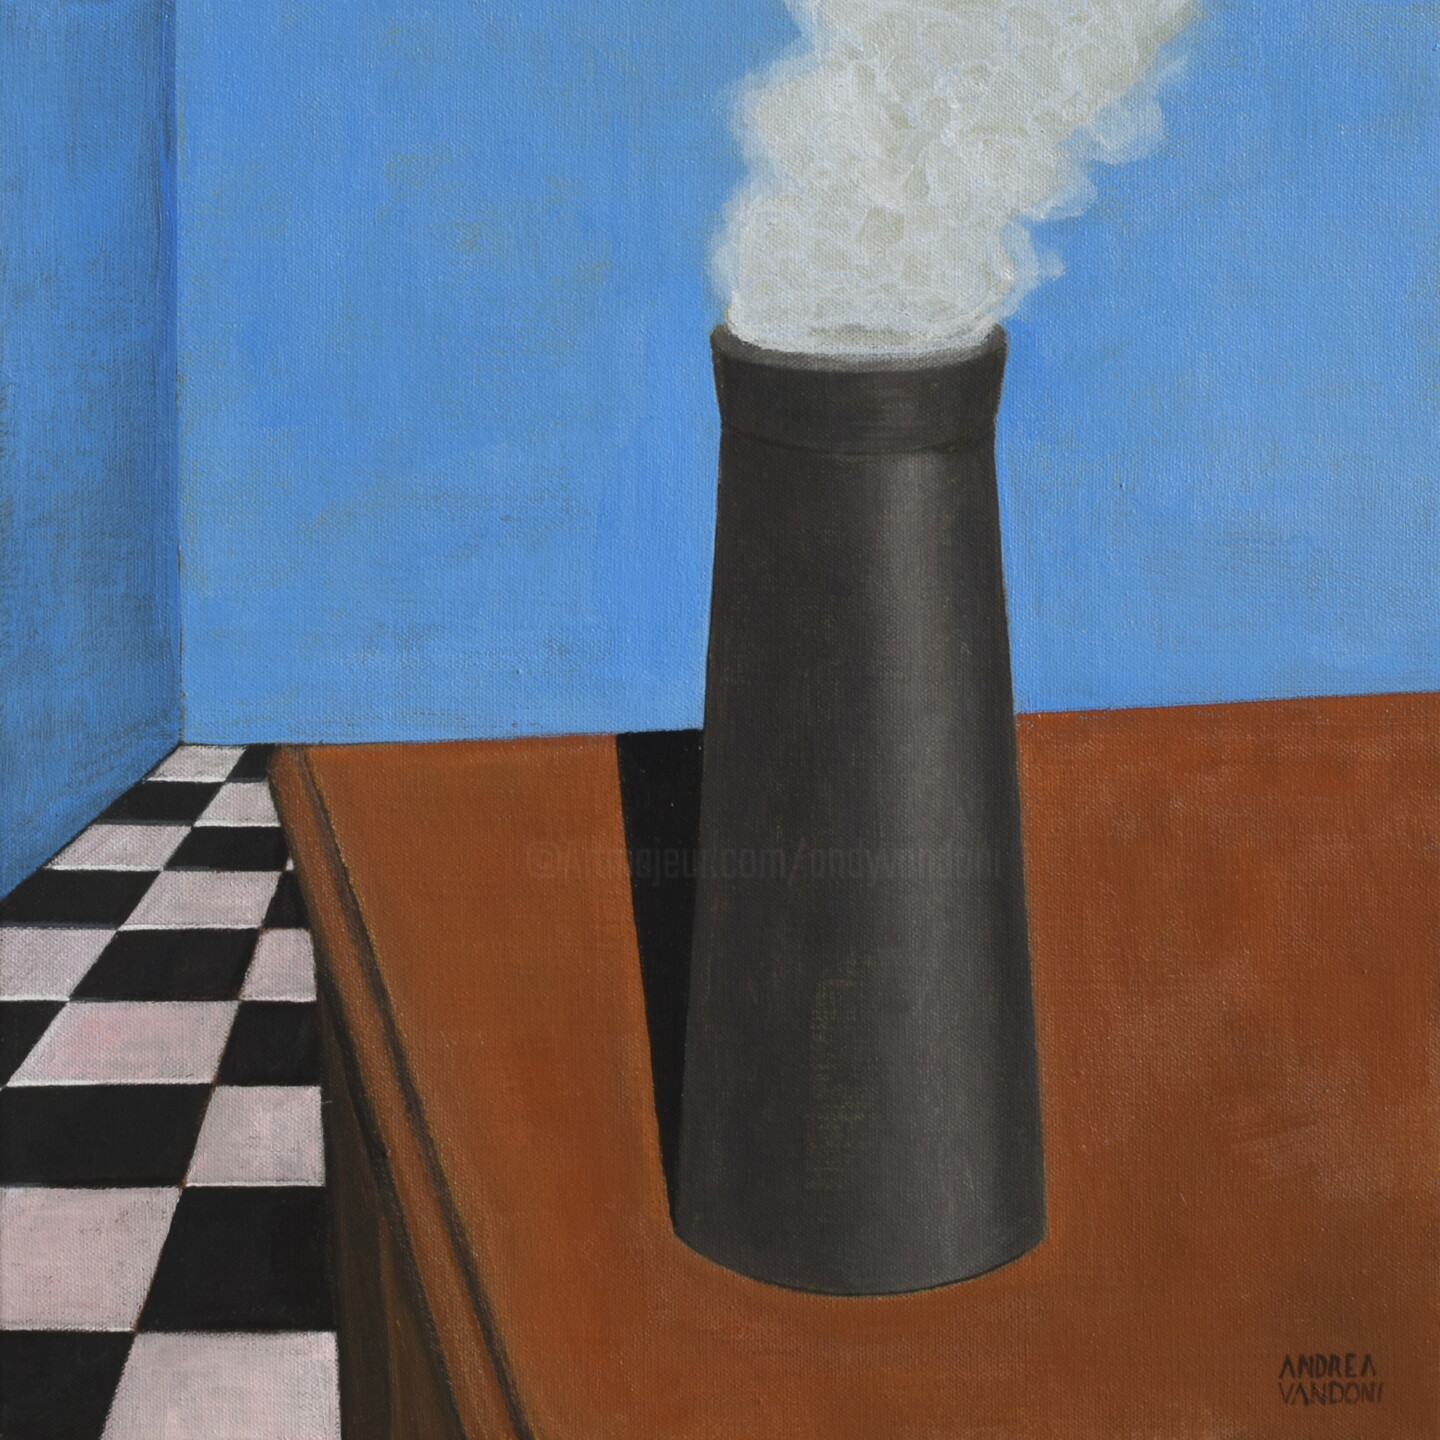 Andrea Vandoni - The Chimney Is On The Table - 2